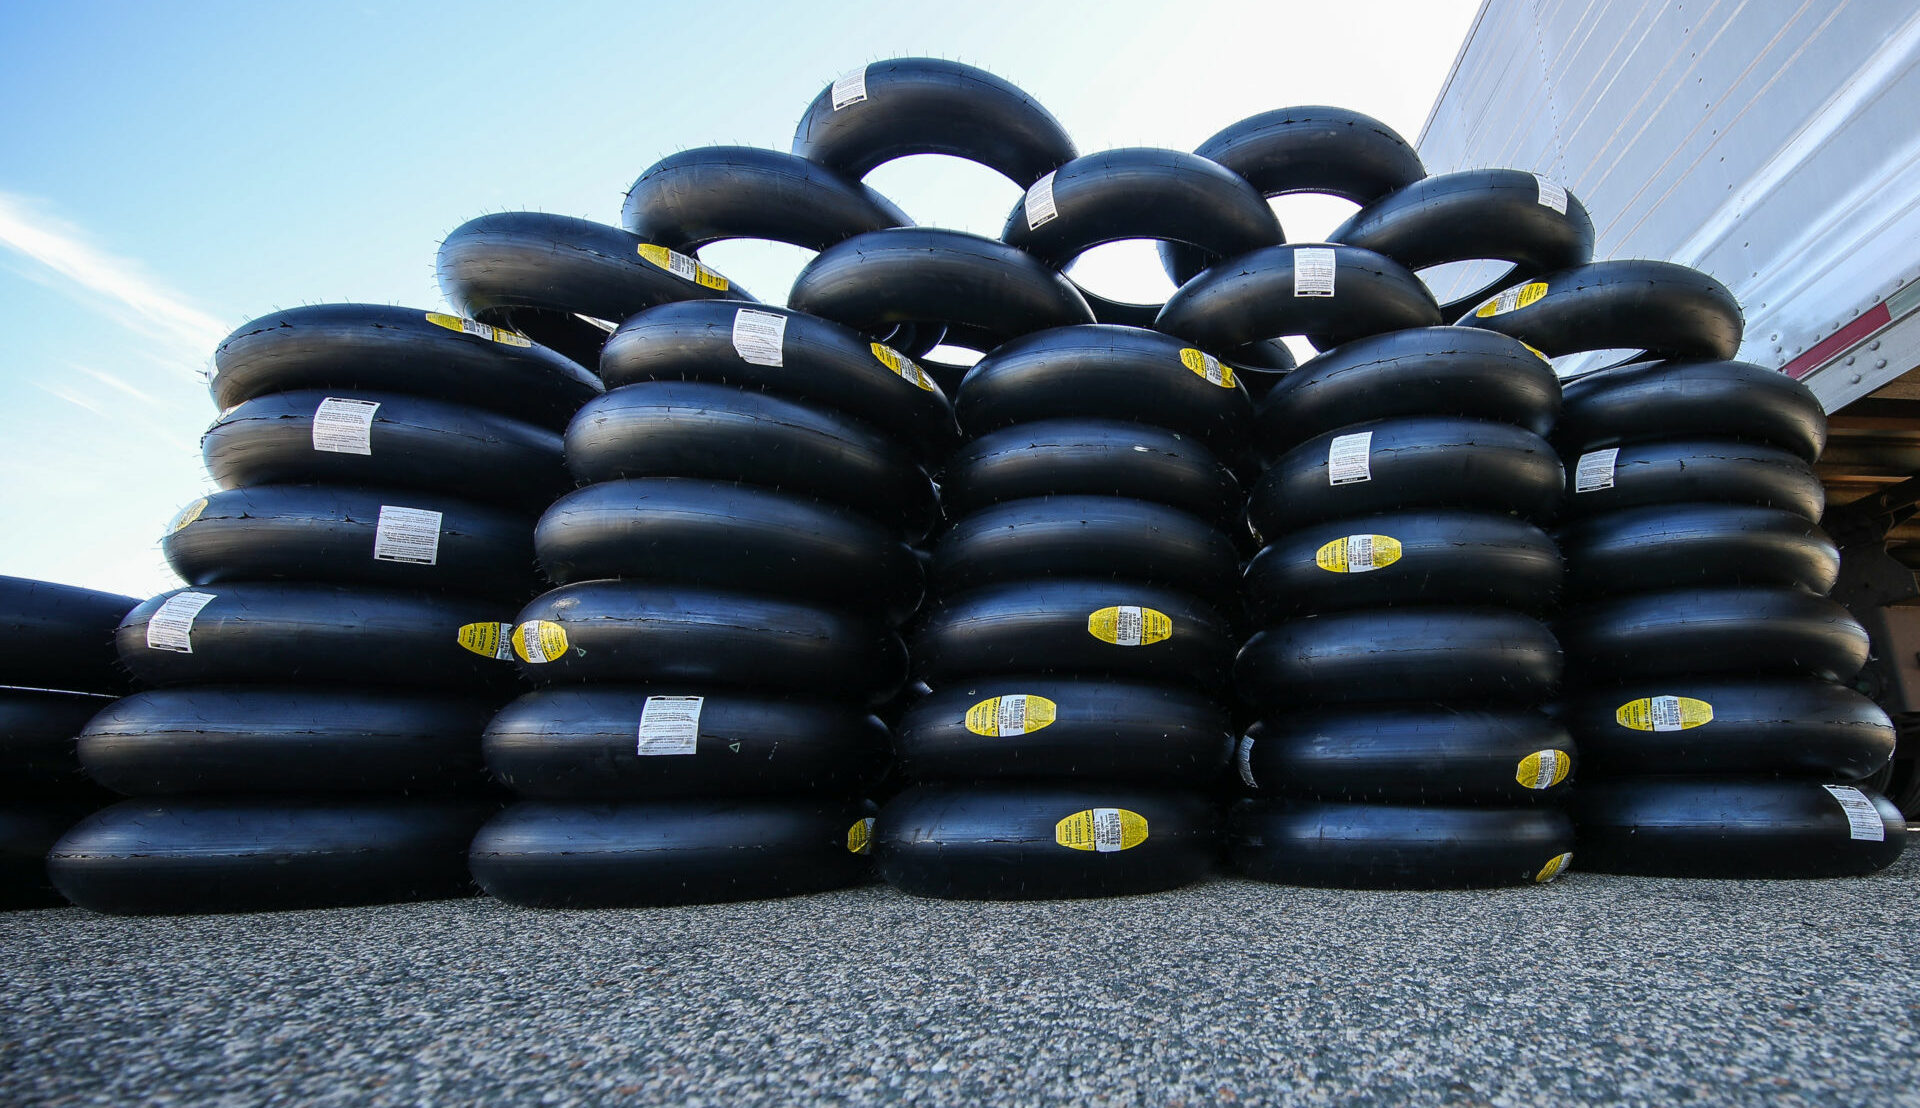 Dunlop is the new exclusive tire supplier for the Superstock class of the FIM Endurance World Championship. Photo by Brian J. Nelson.